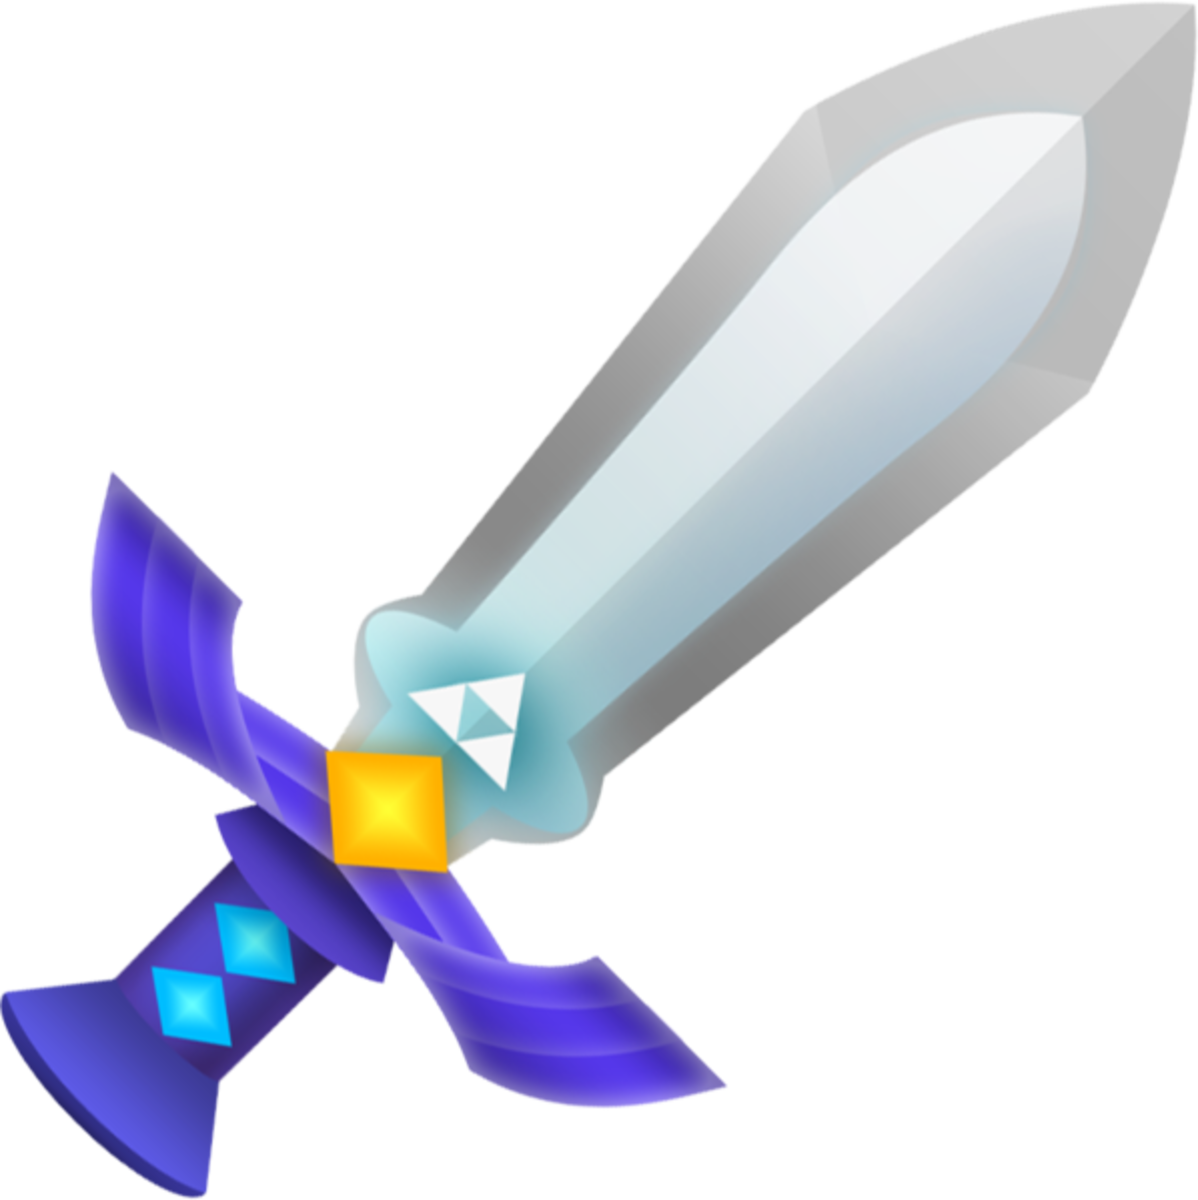 Picture of the Master Sword as seen in A Link Between Worlds. Upgrading the Master Sword changes the color of its blade to red (L2), then gold (L3).